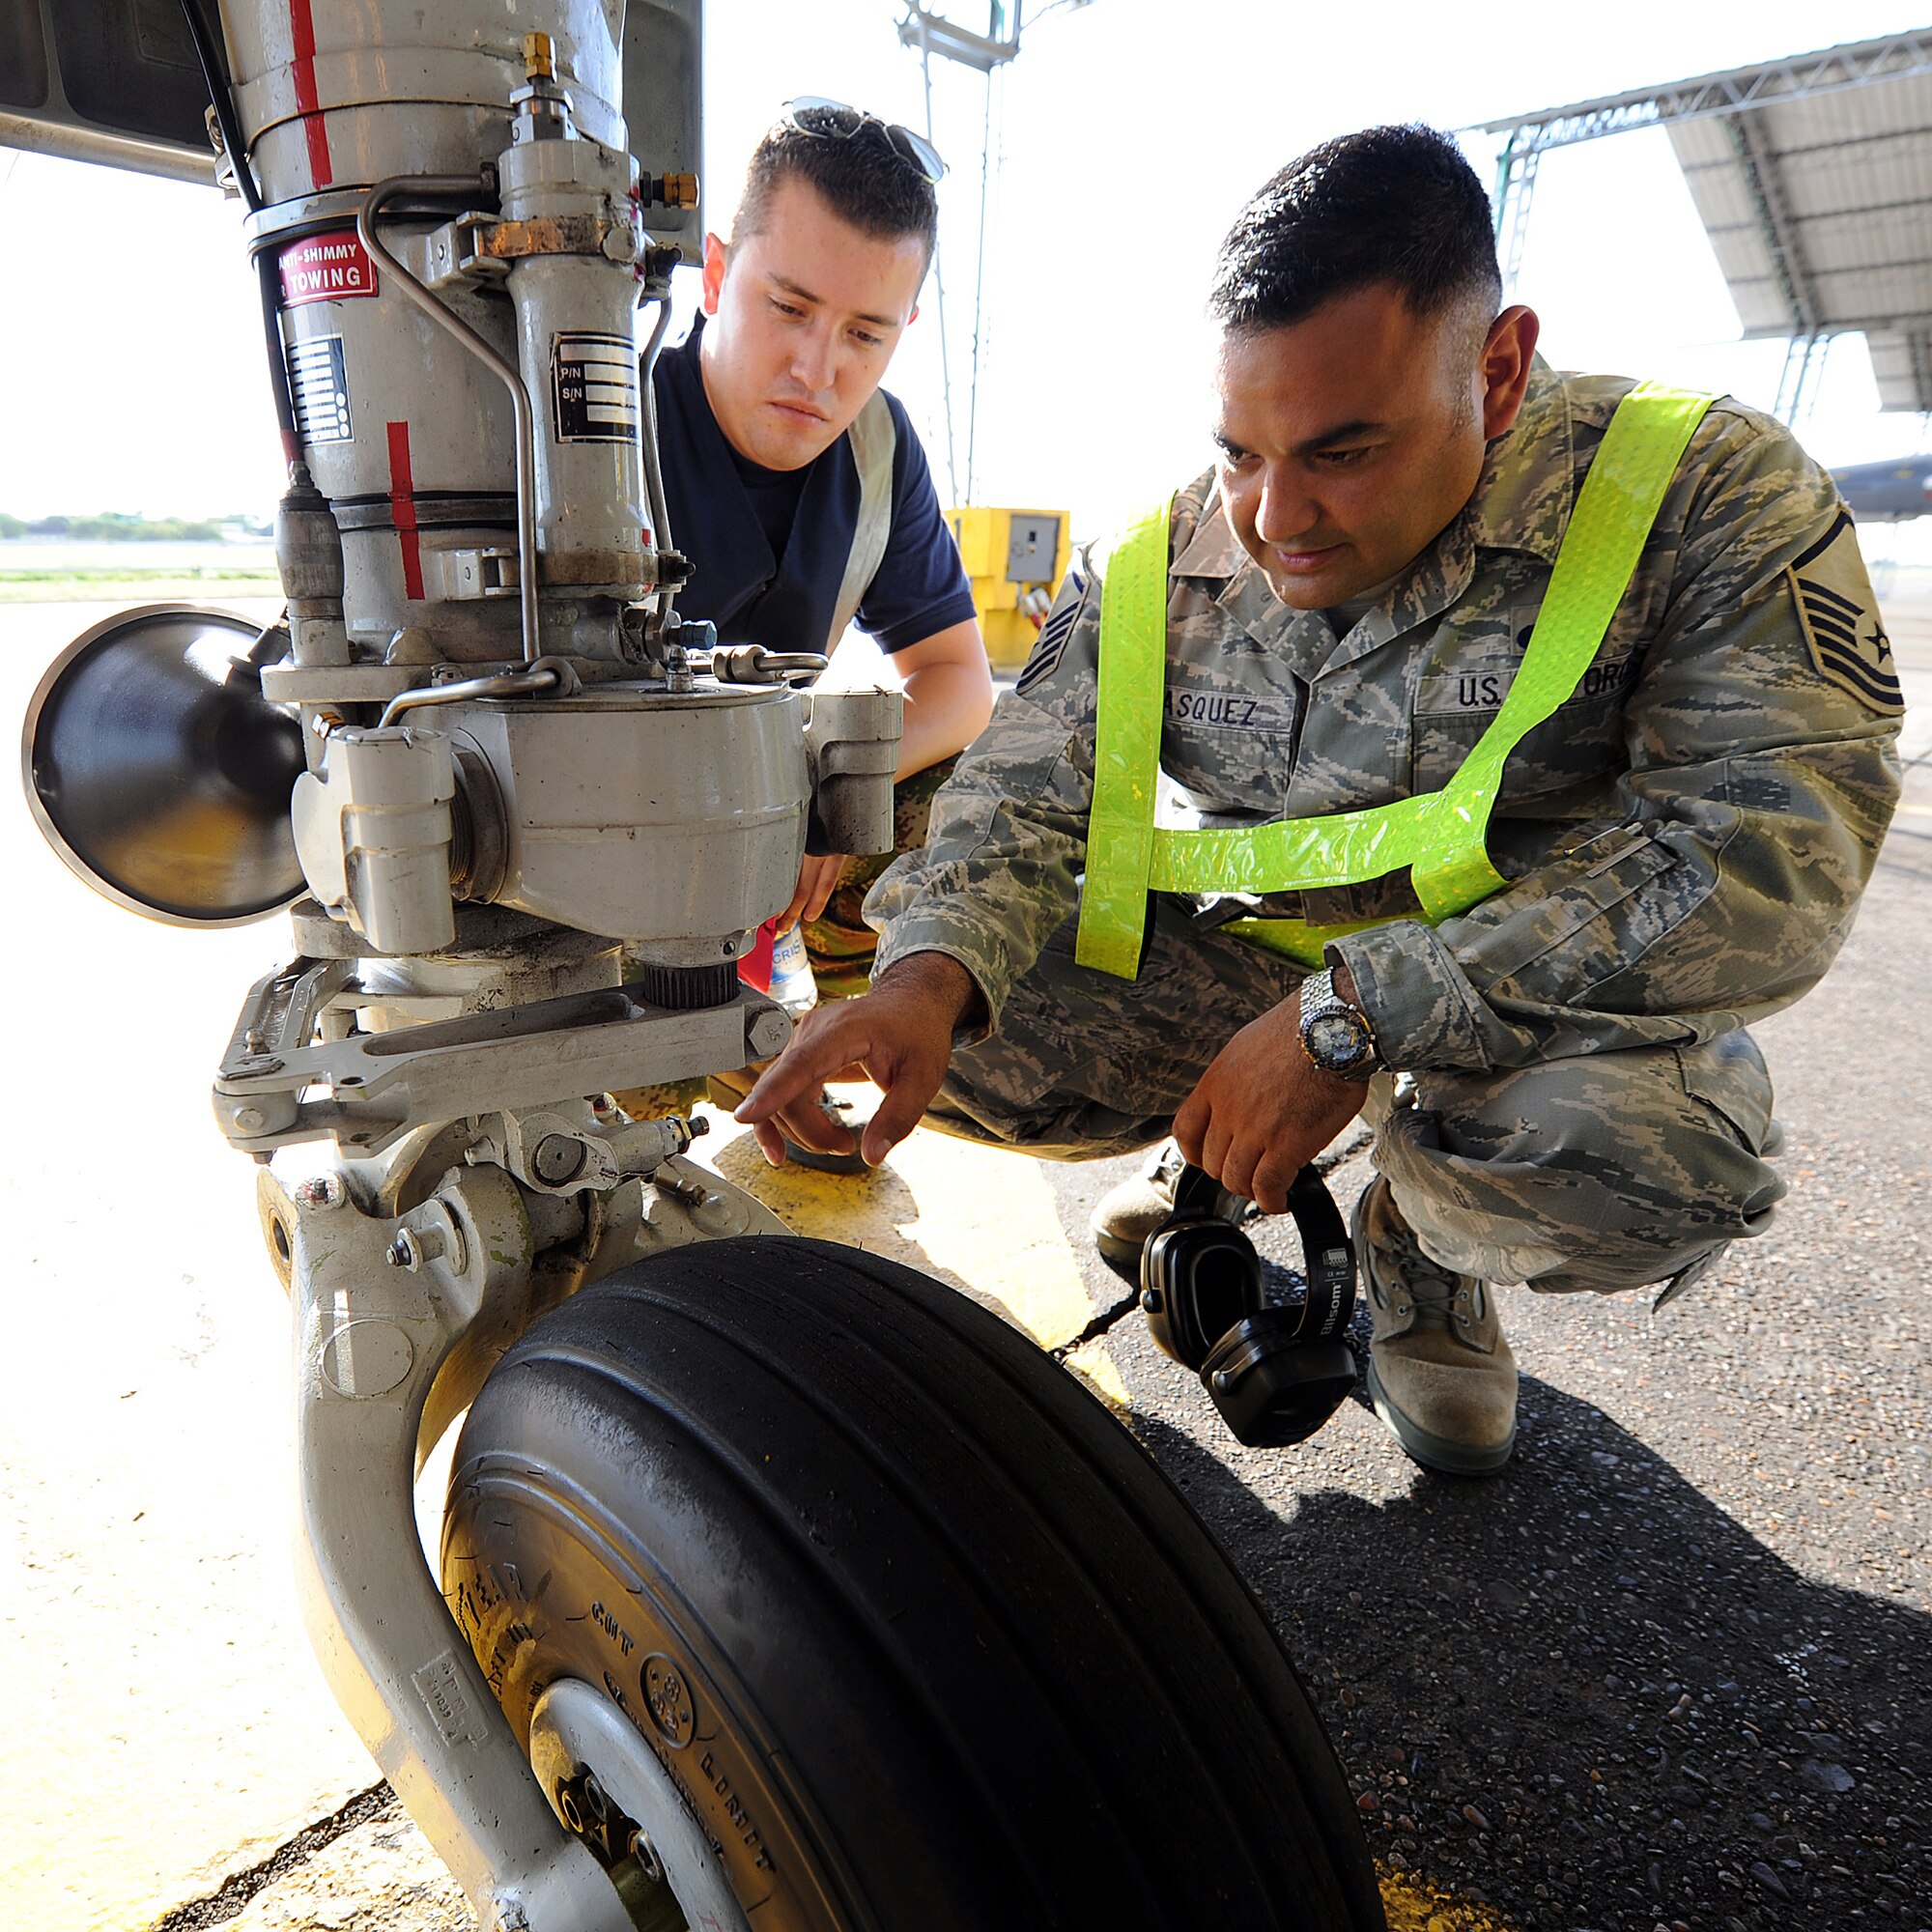 Master Sgt. Roberto Vasquez, 12th AF (AFSOUTH) heavy aircraft manager, and a Colombian crew chief inspect the wheels on a KFIR aircraft prior to take-off June 15, at Comando Aéreo de Combate No. 1 base, Palanquero, Colombia, as part of a month-long Air Mobility Command Building Partner Capacity mission. (U.S. Air Force photo by Tech. Sgt. Lesley Waters)